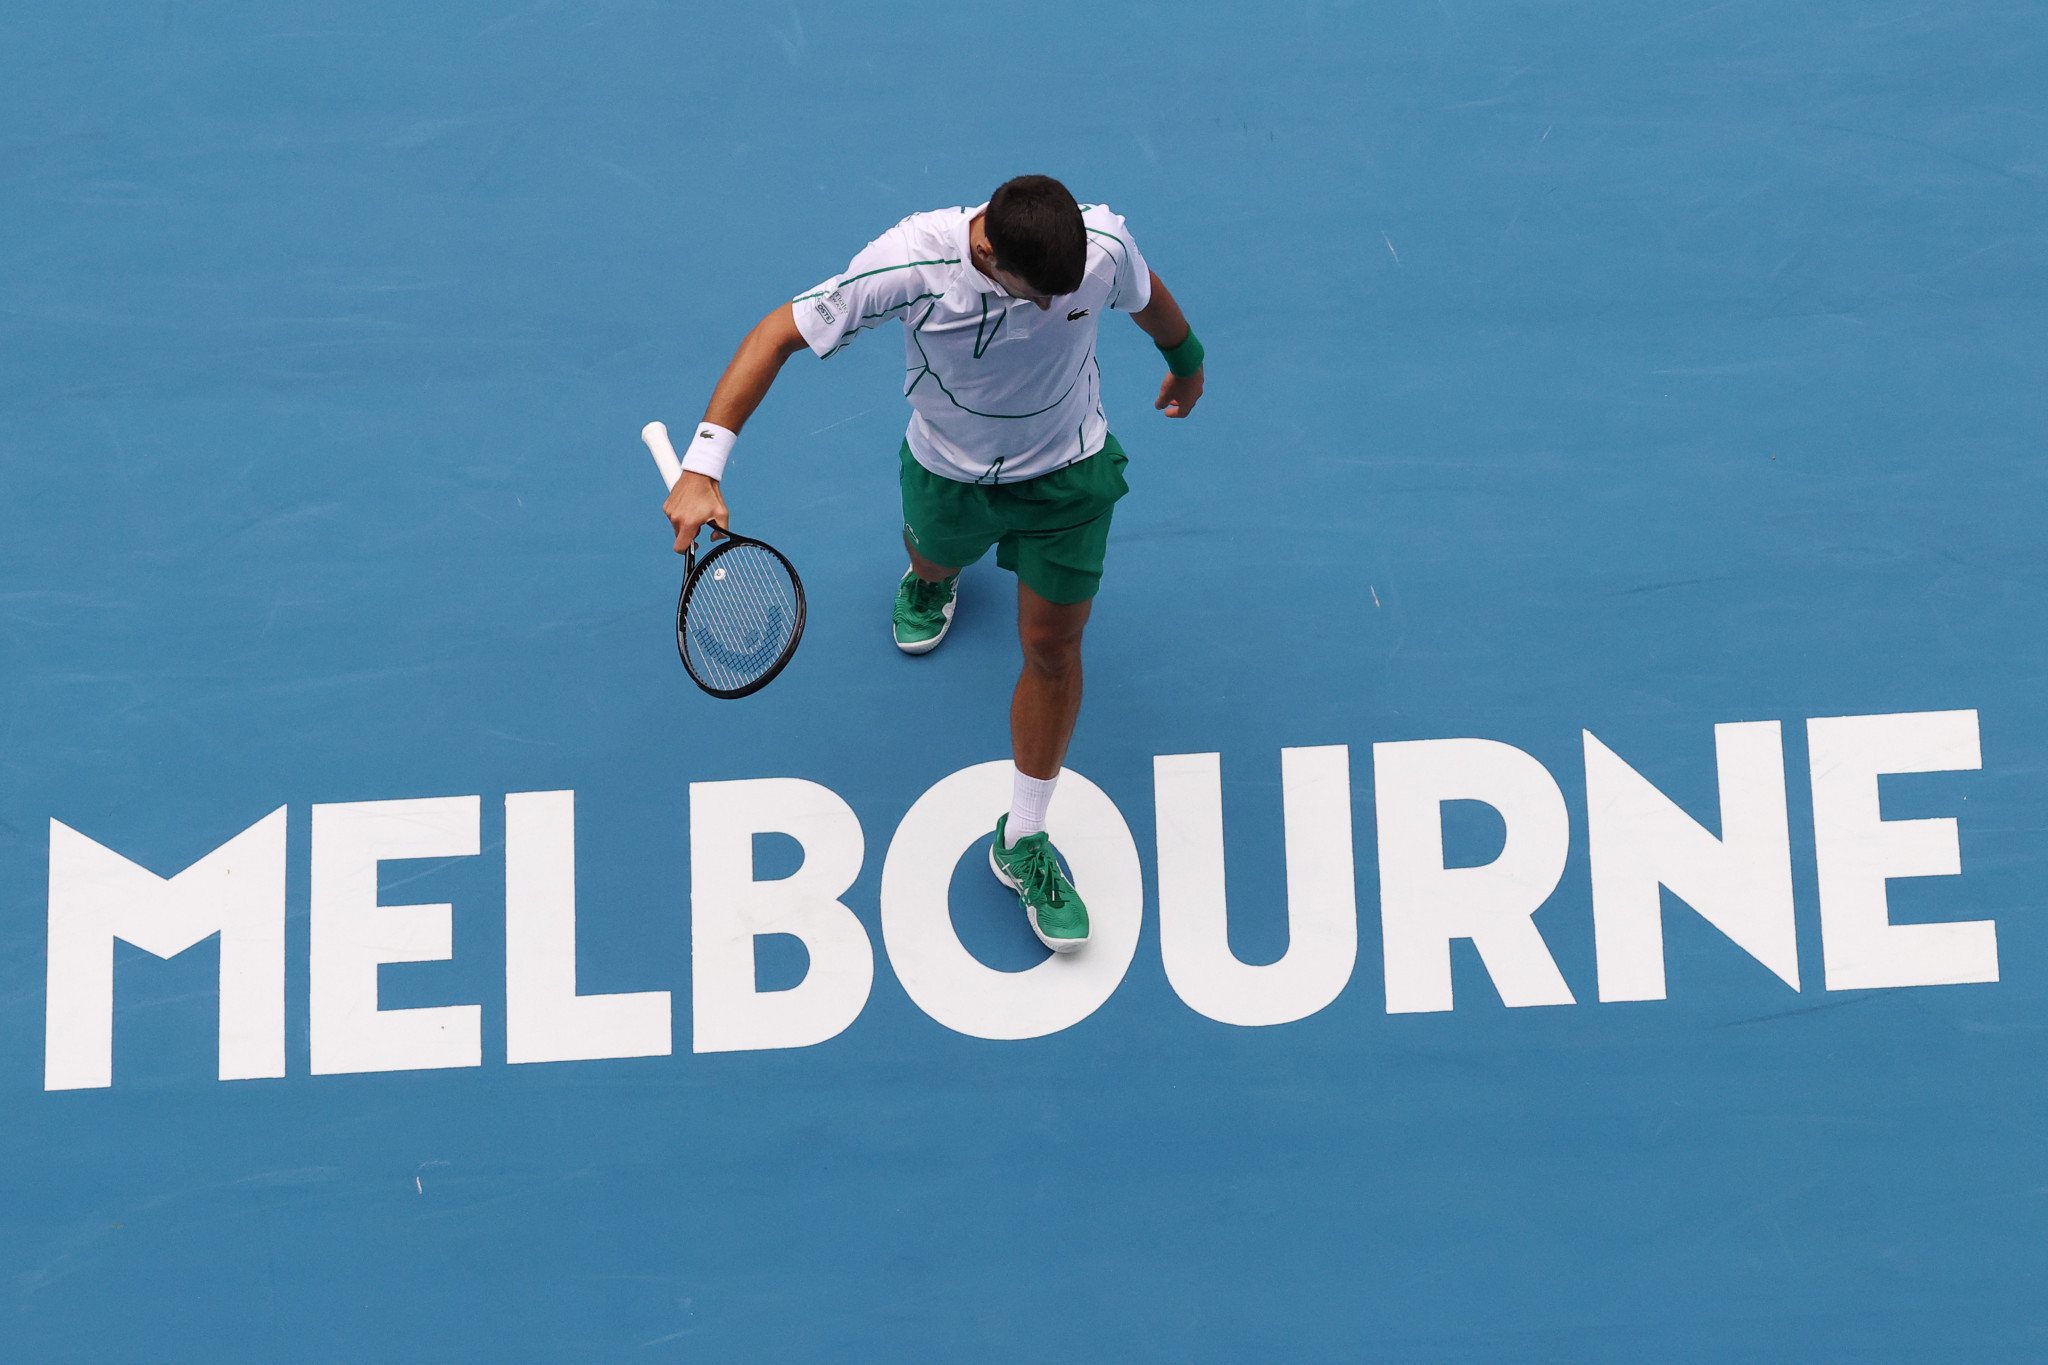 Big names have trouble-free days at Australian Open